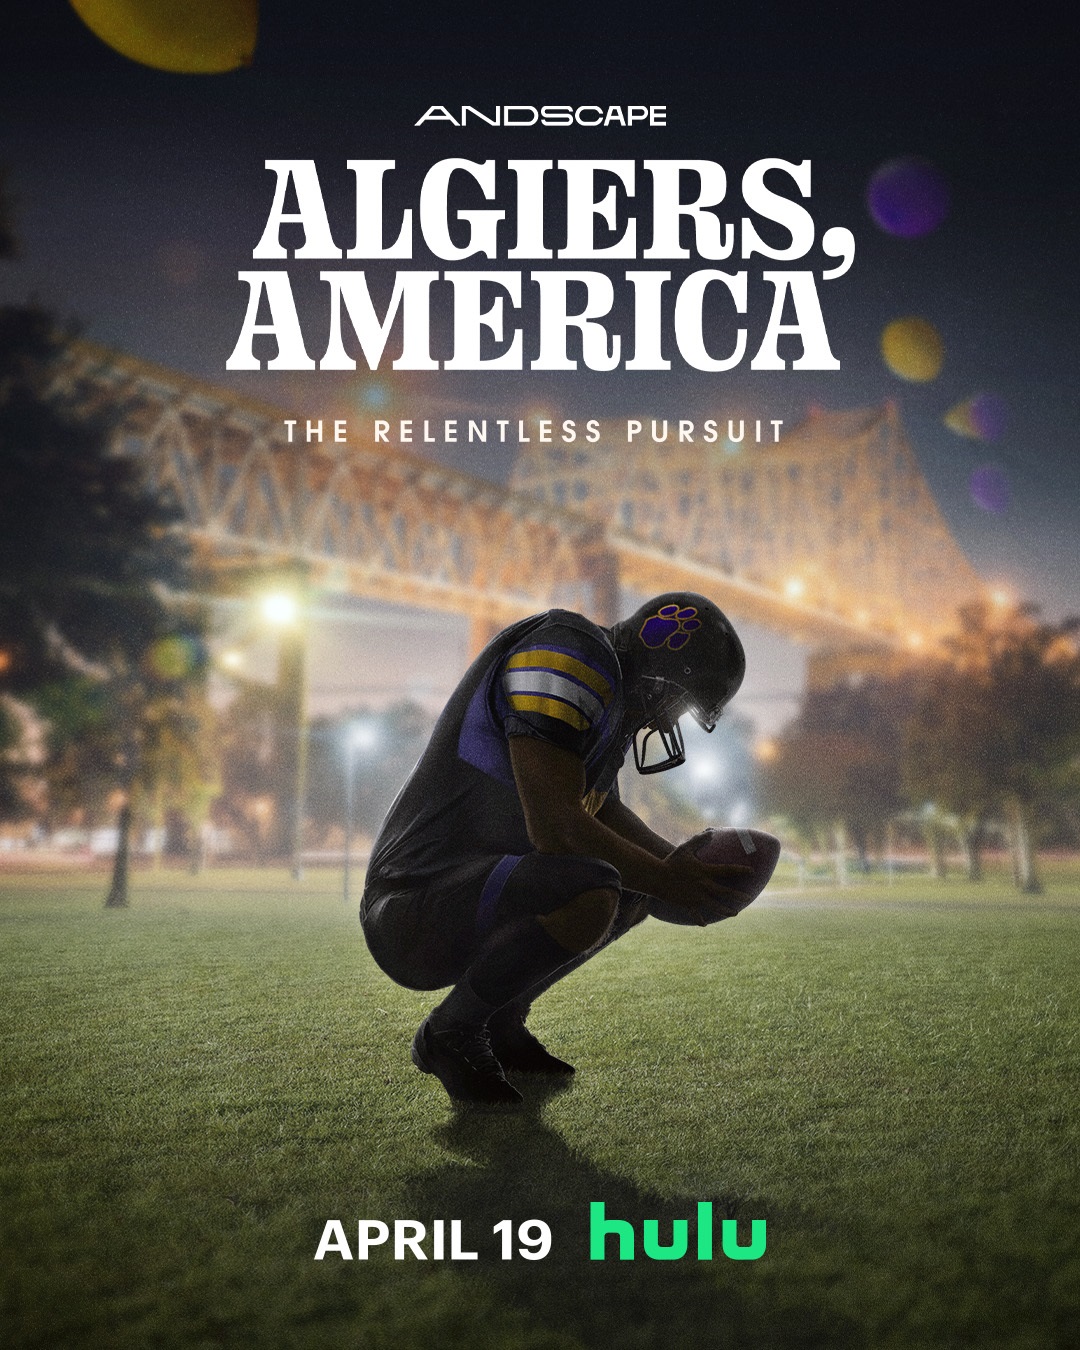 Hulus Algiers, America The Relentless Pursuit Shows the Hardship of High School Football (VIDEO)